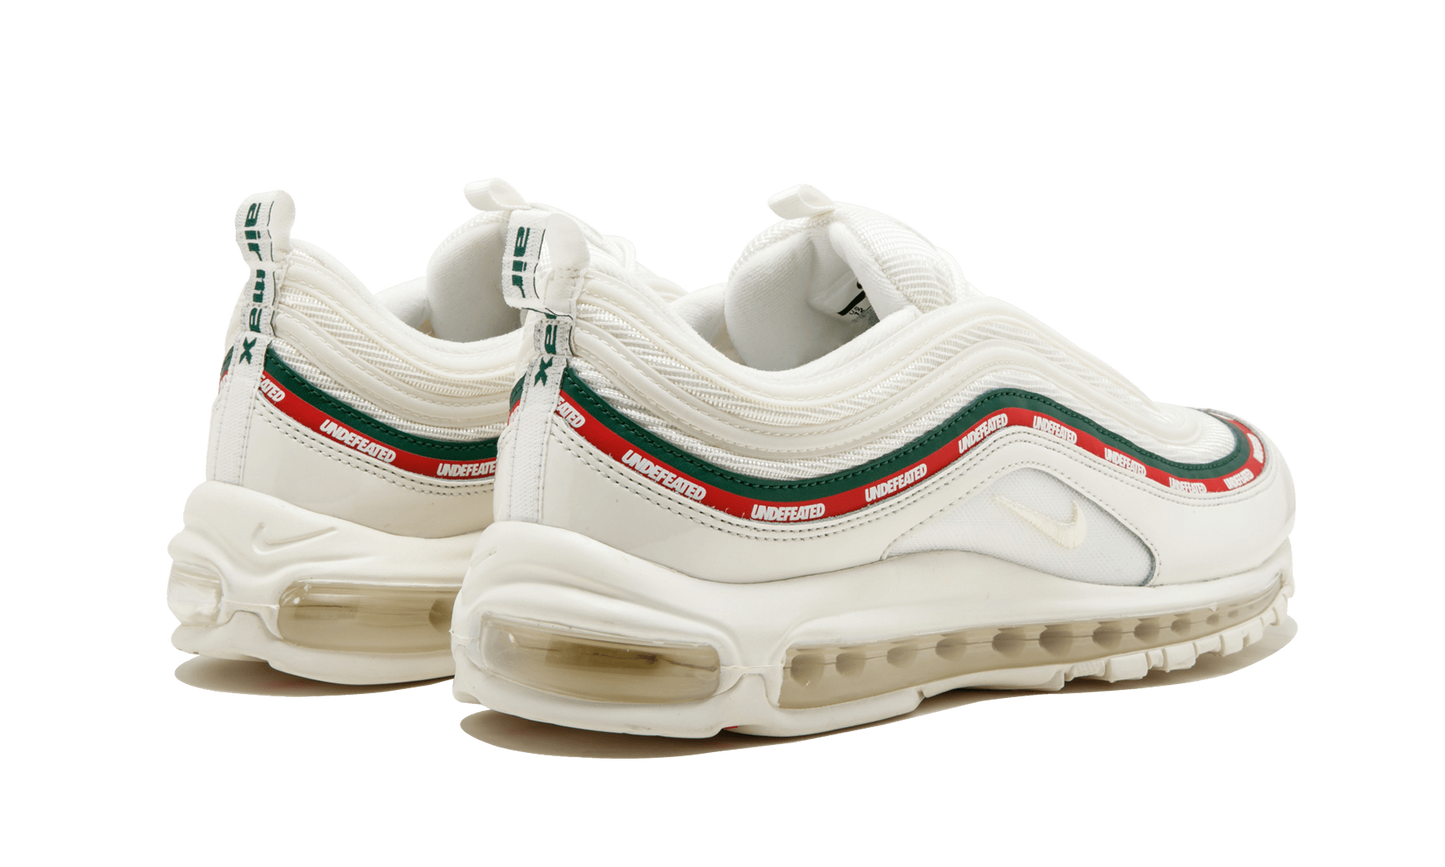 Air Max 97 OG UNDFTD “Undefeated - White”